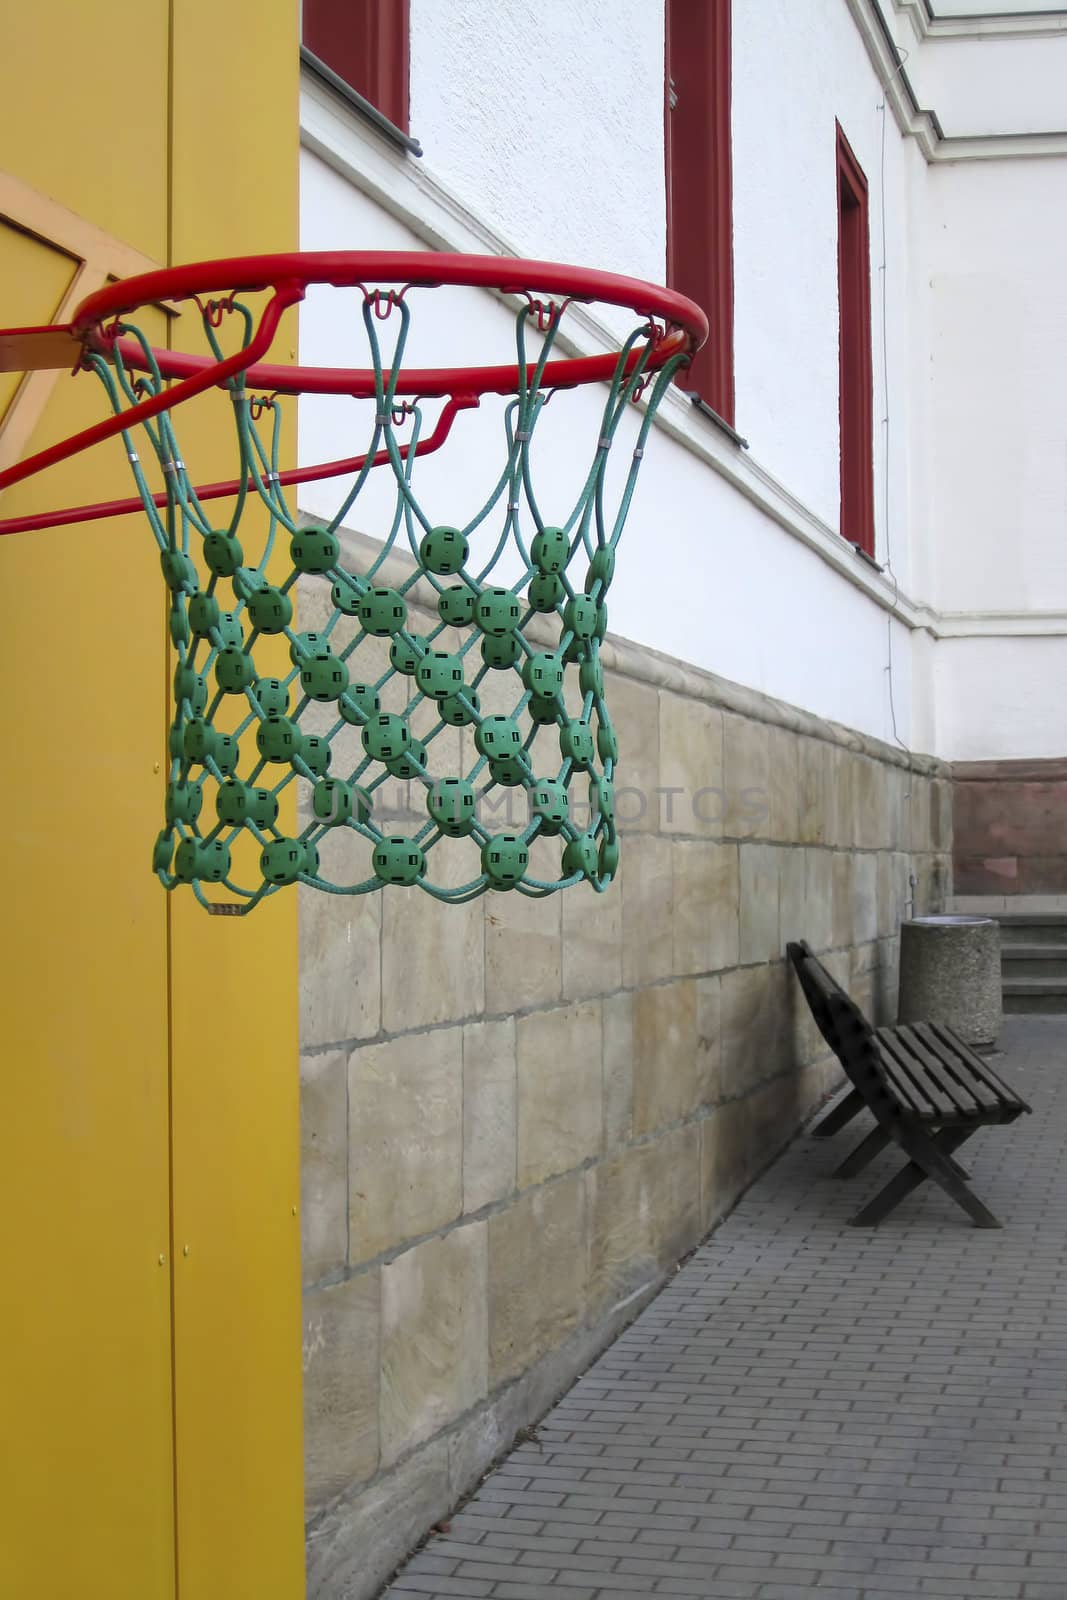 Basketball against a background of an empty school yard by Nickondr